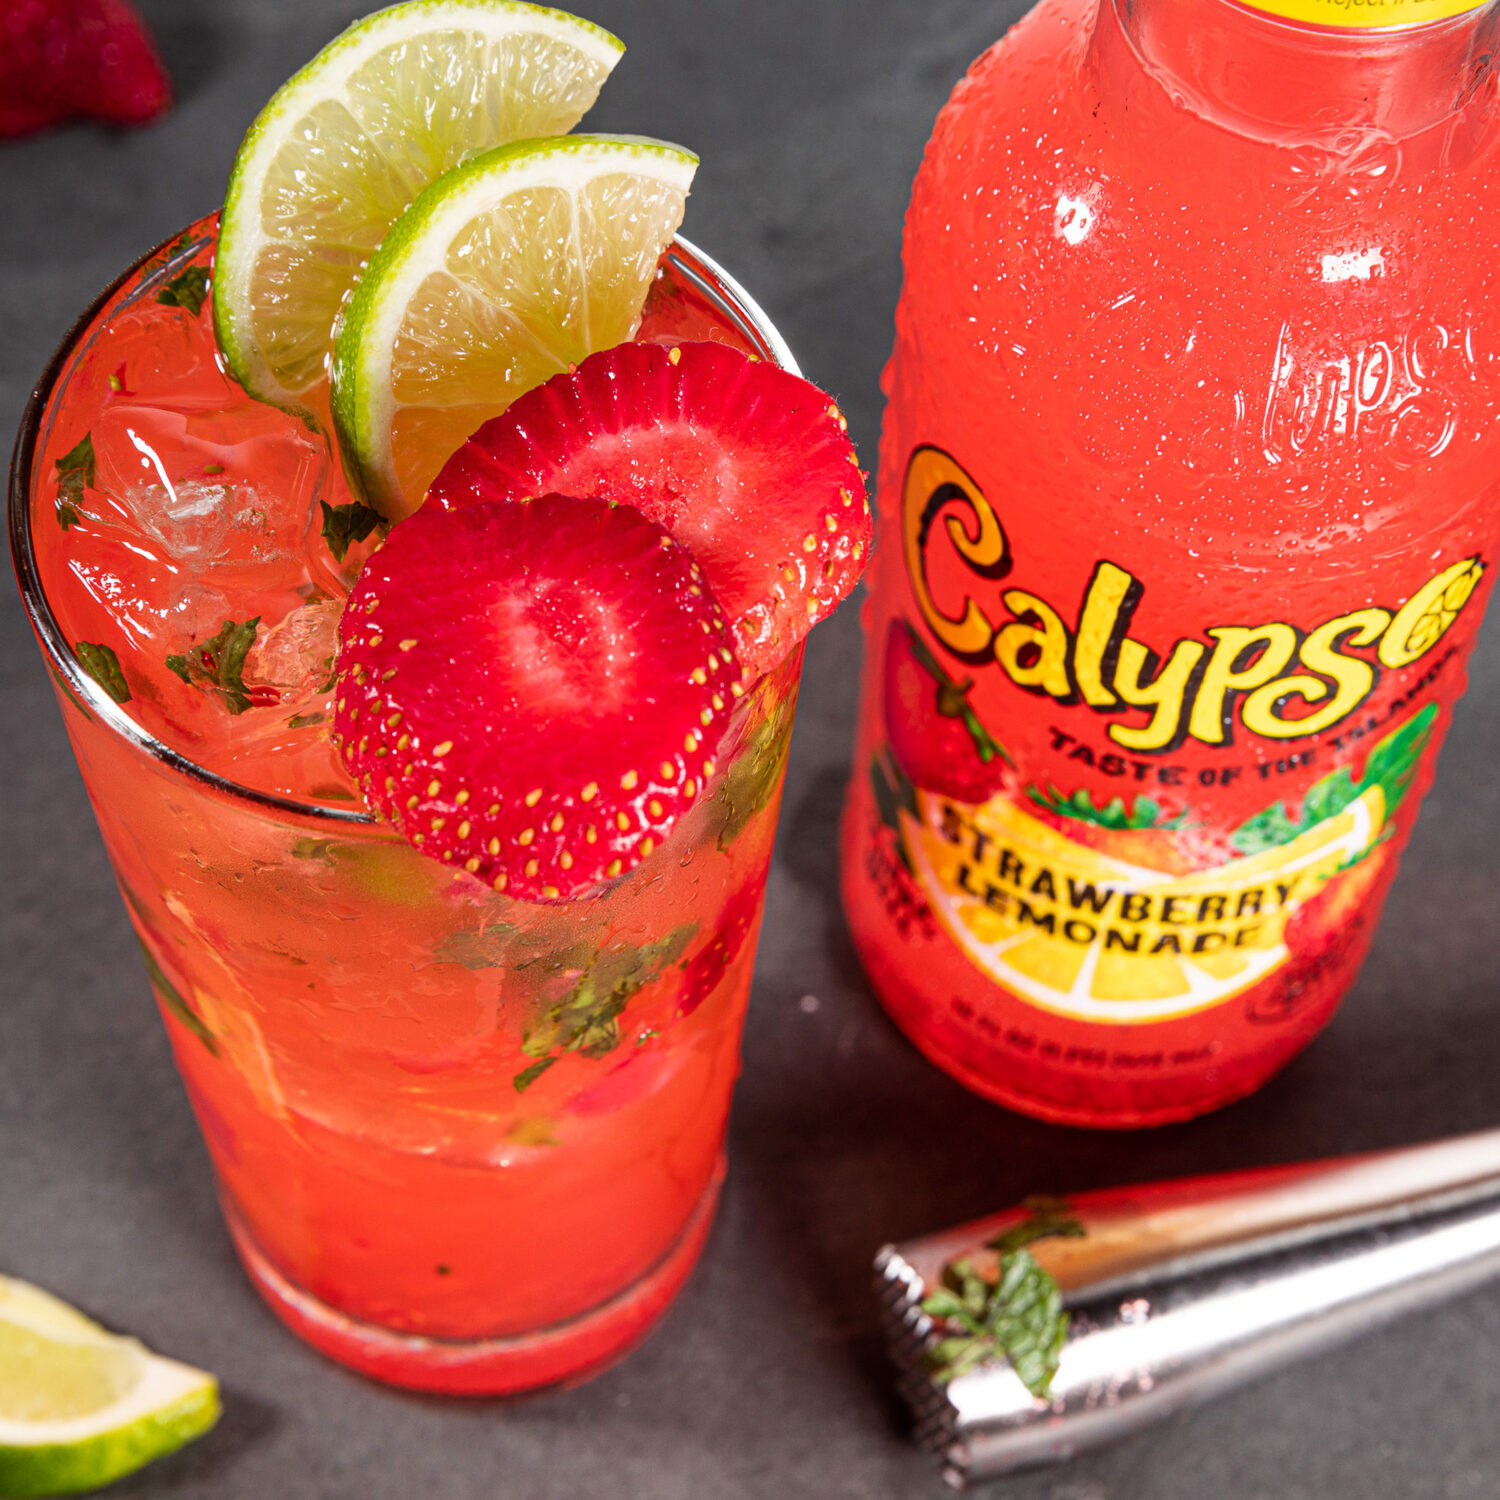 A bottle of Calypso Strawberry Lemonade next to a strawberry and mint cockail.